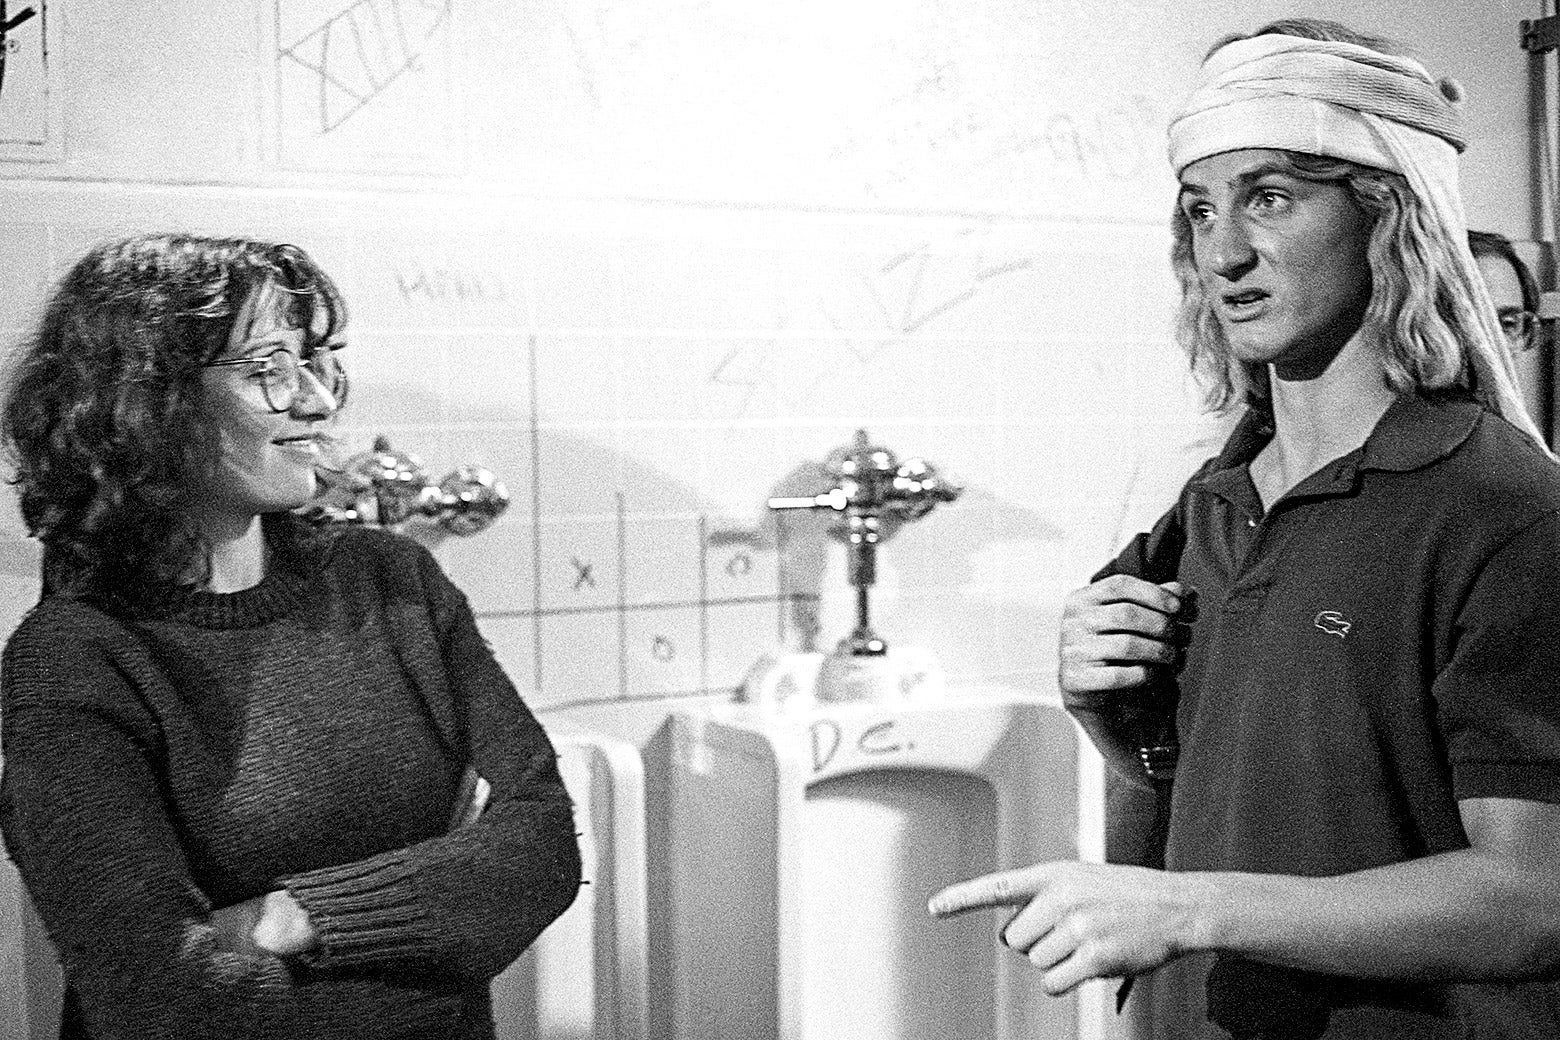 Black and white photo of Heckerling smiling with arms crossed at Penn as Spicoli wearing a polo and backpack in a boys bathroom with a row of urinals behind them